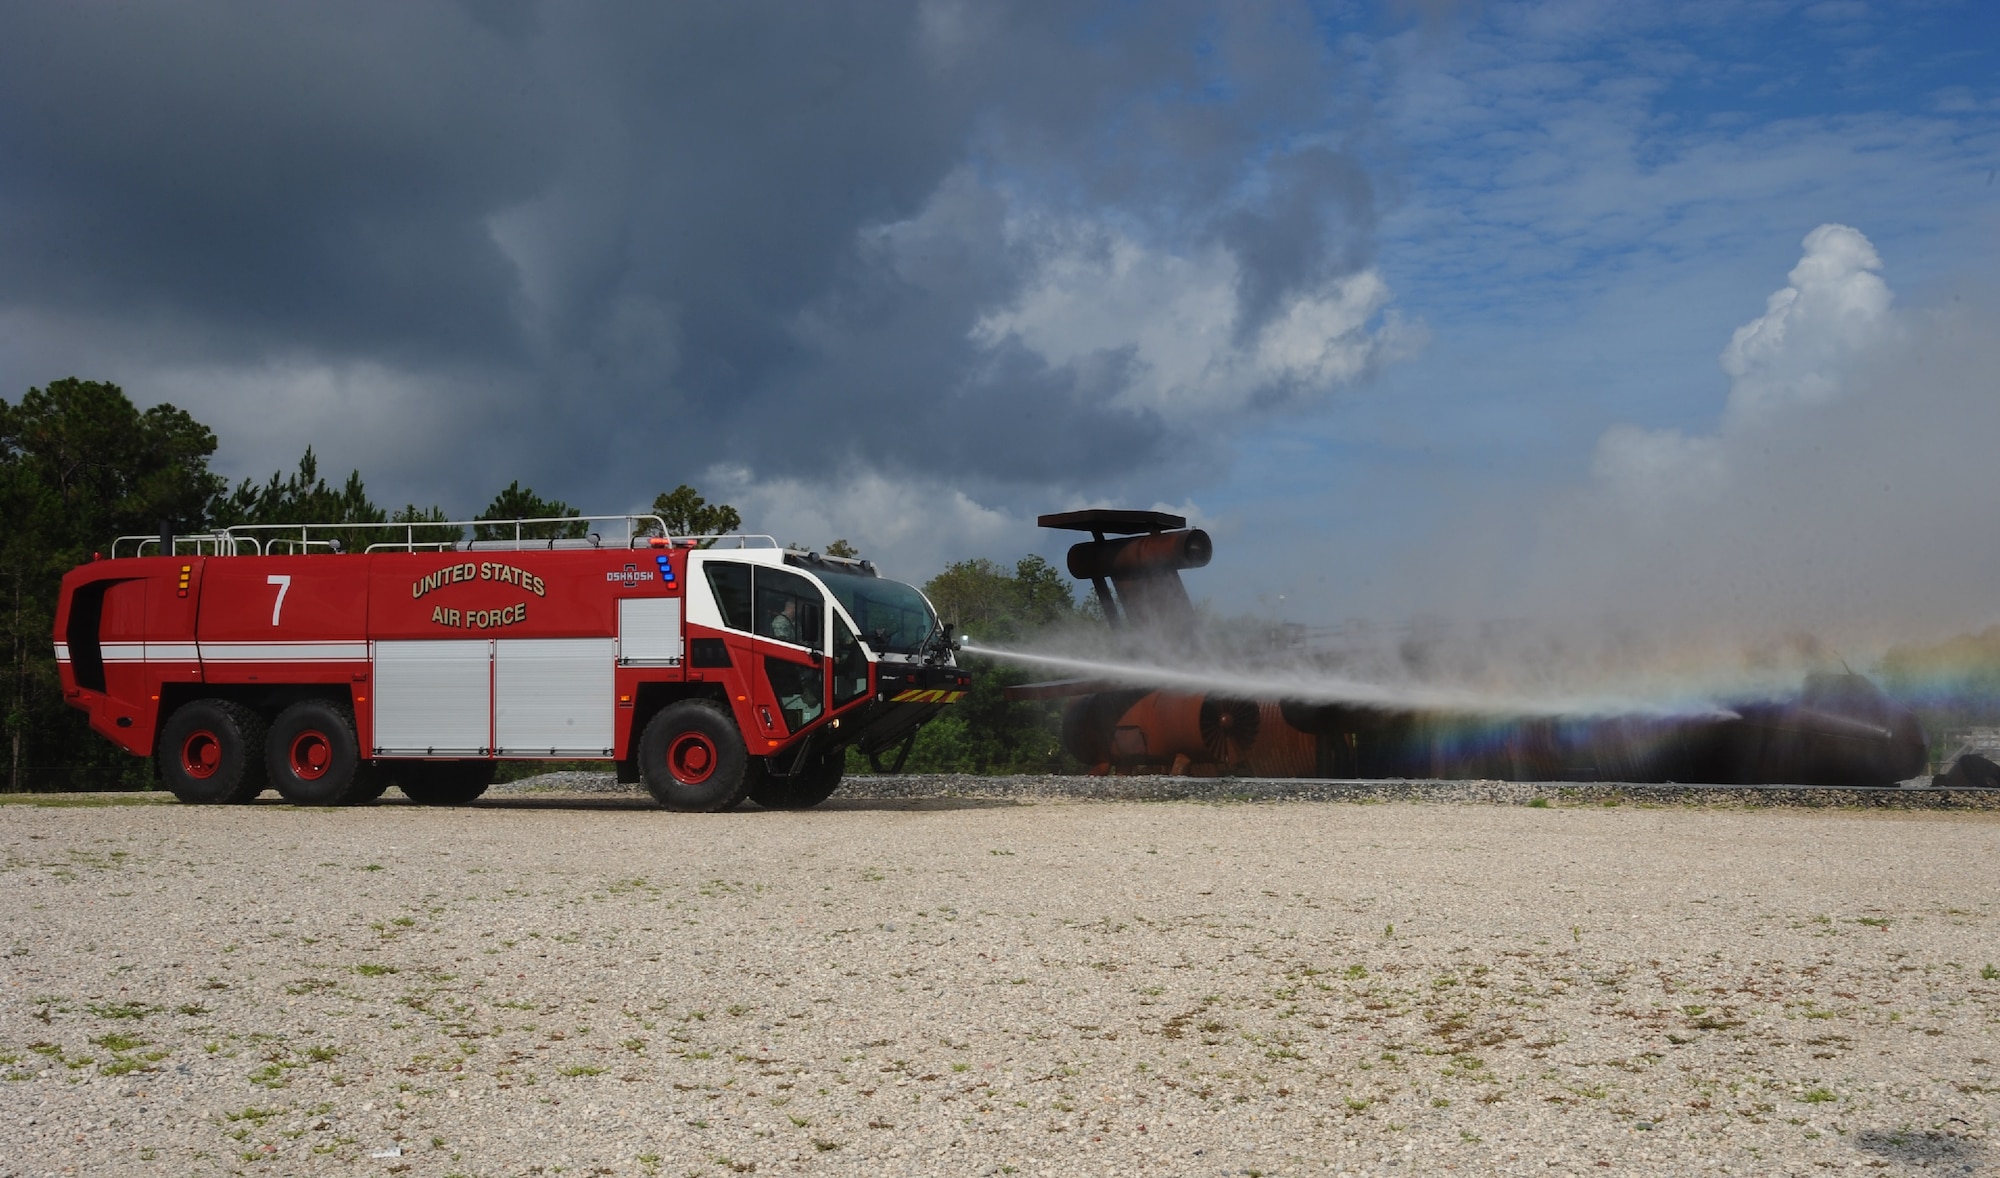 Airmen assigned to the 6th Civil Engineer Squadron use a new Striker 3000 fire truck during a training demonstration June 9, 2016 at MacDill Air Force Base, Fla. The new trucks feature a water pump capable of pushing water out at 1,400 pounds per square inch which creates a finer water particle able to extinguish fire more effectively. (U.S. Air Force photo by Airman Adam R. Shanks)